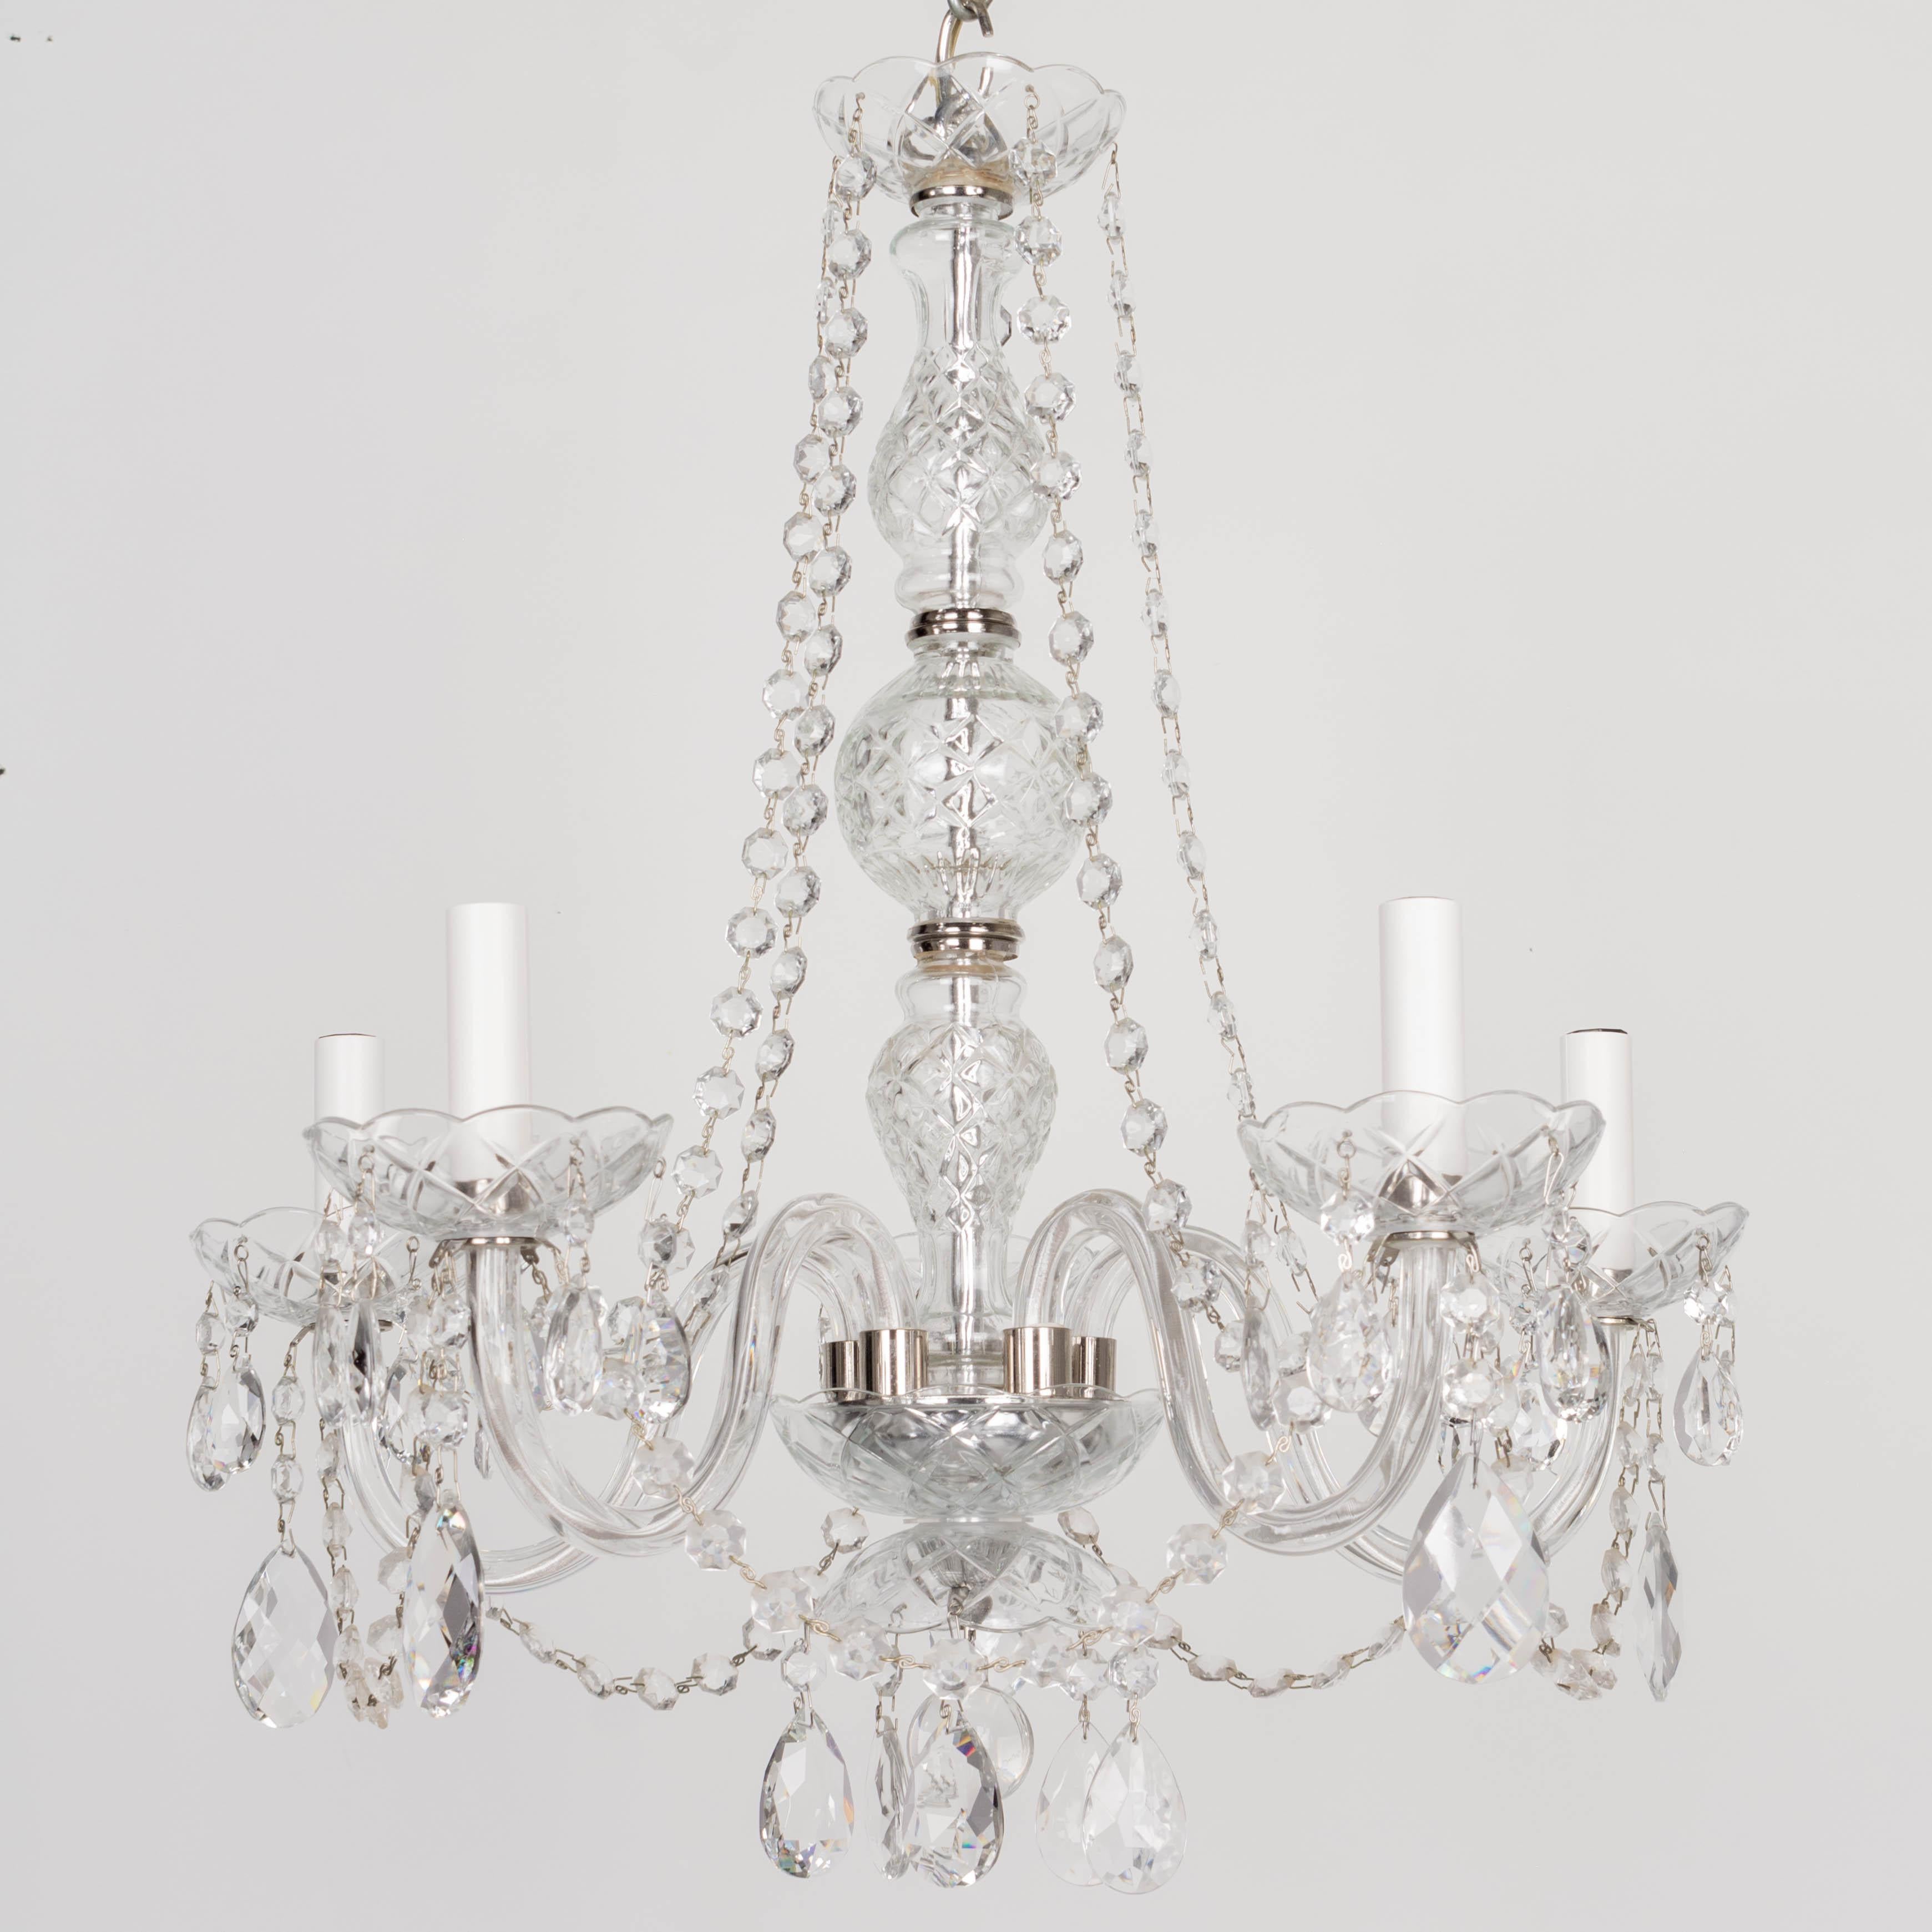 Vintage French Crystal Chandelier In Good Condition For Sale In Winter Park, FL